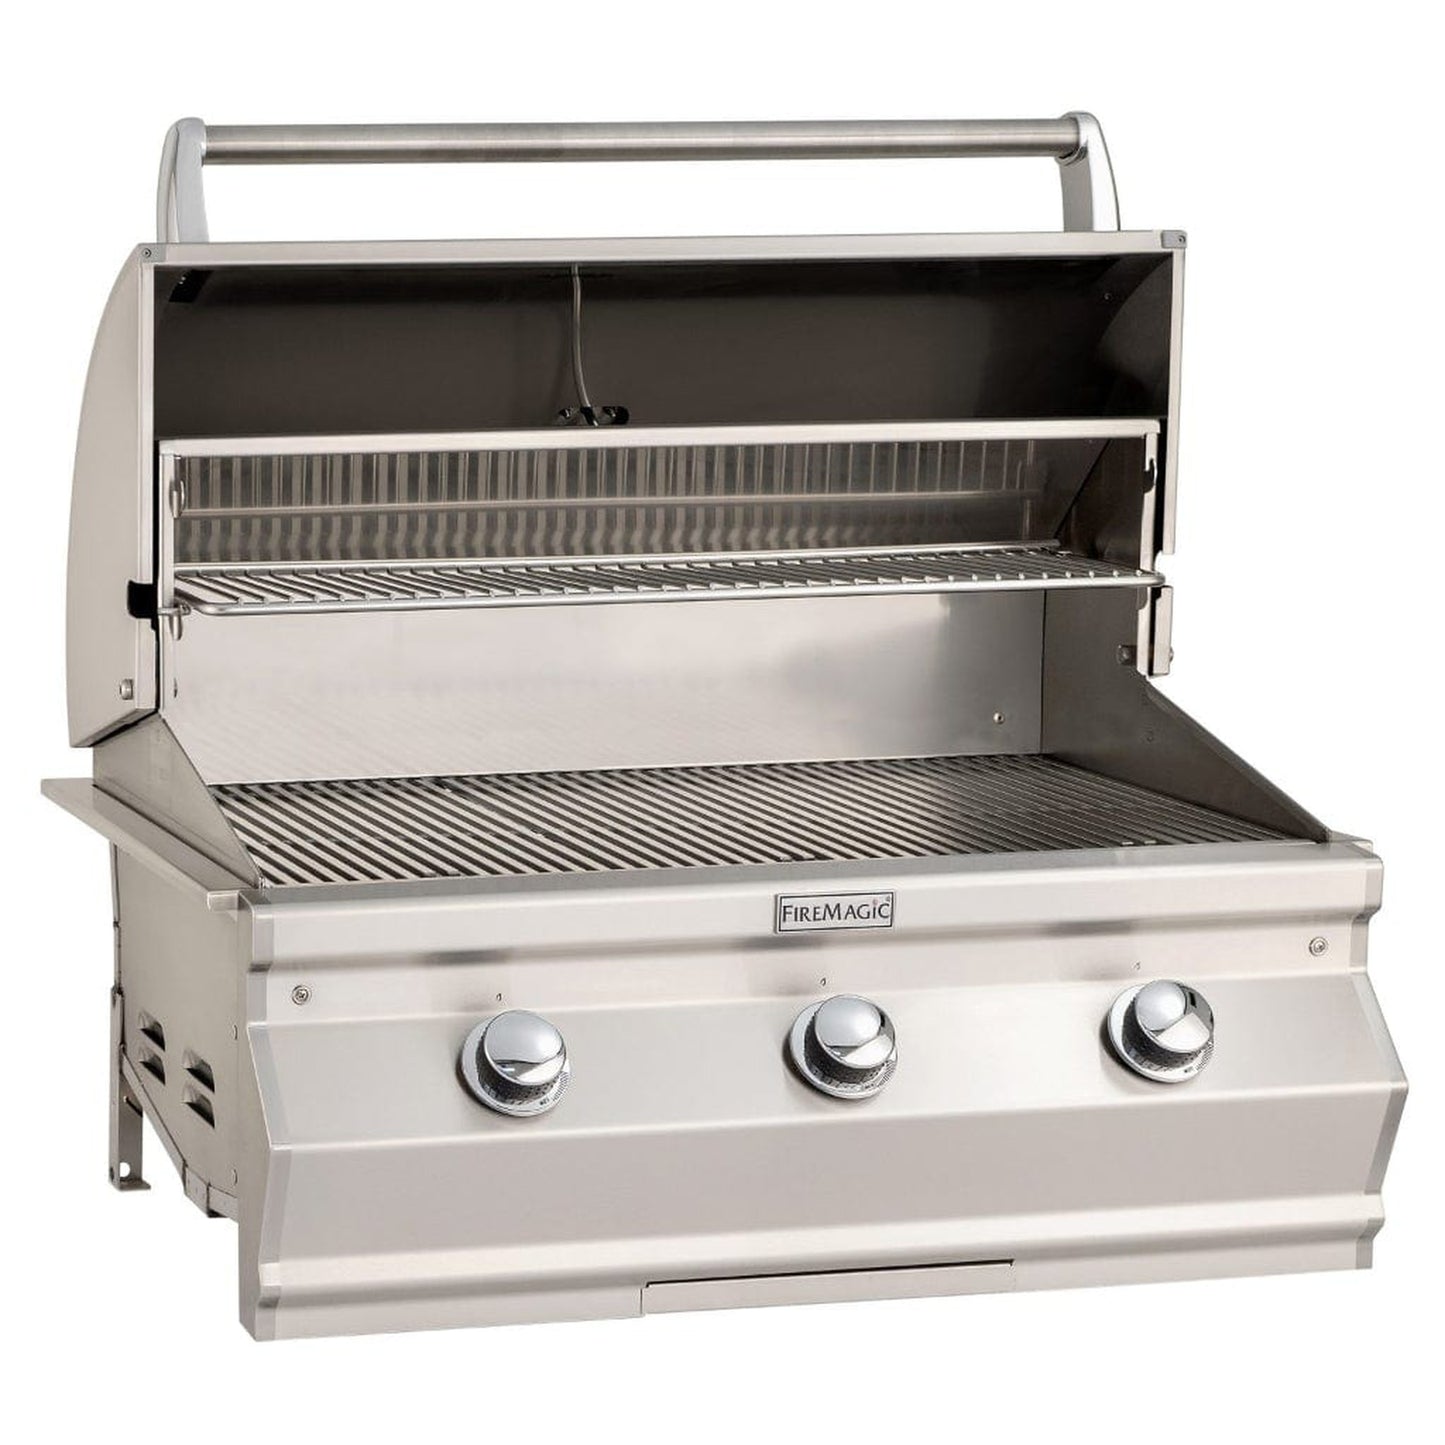 Fire Magic 30" 3-Burner Choice C540i Built-In Gas Grill w/ Analog Thermometer